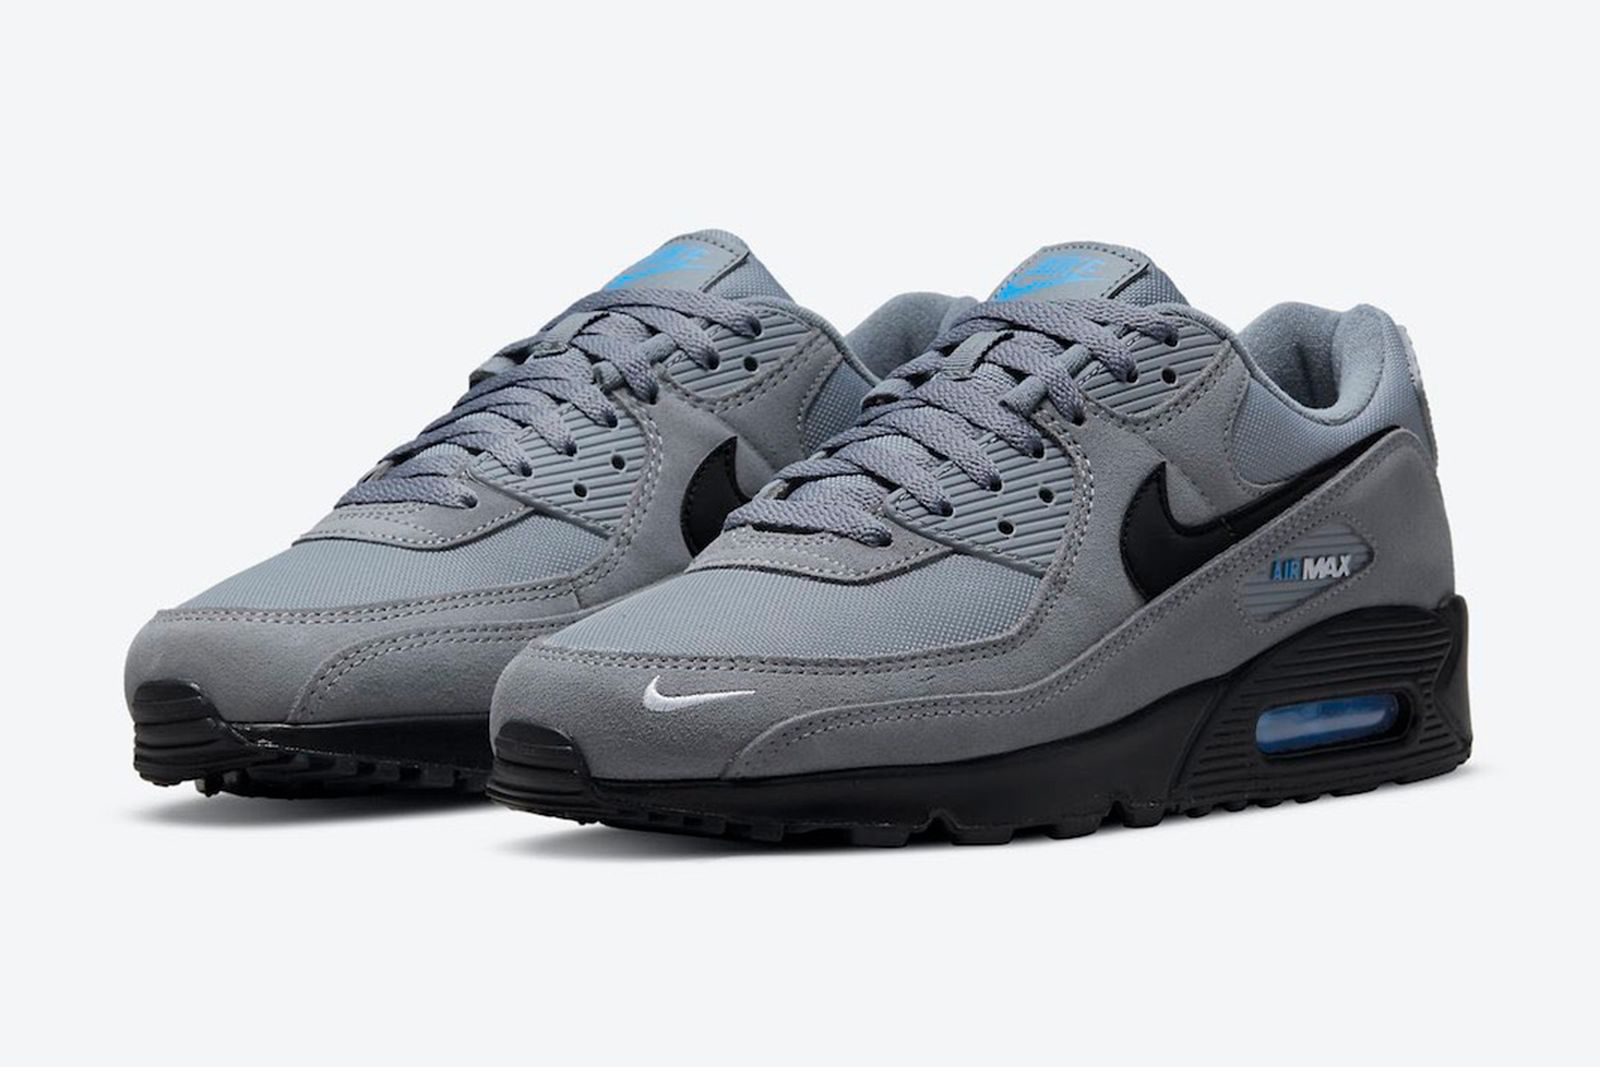 getuigenis rem wol Nike Air Max 90 "Slate" Release Date, Info, Price.